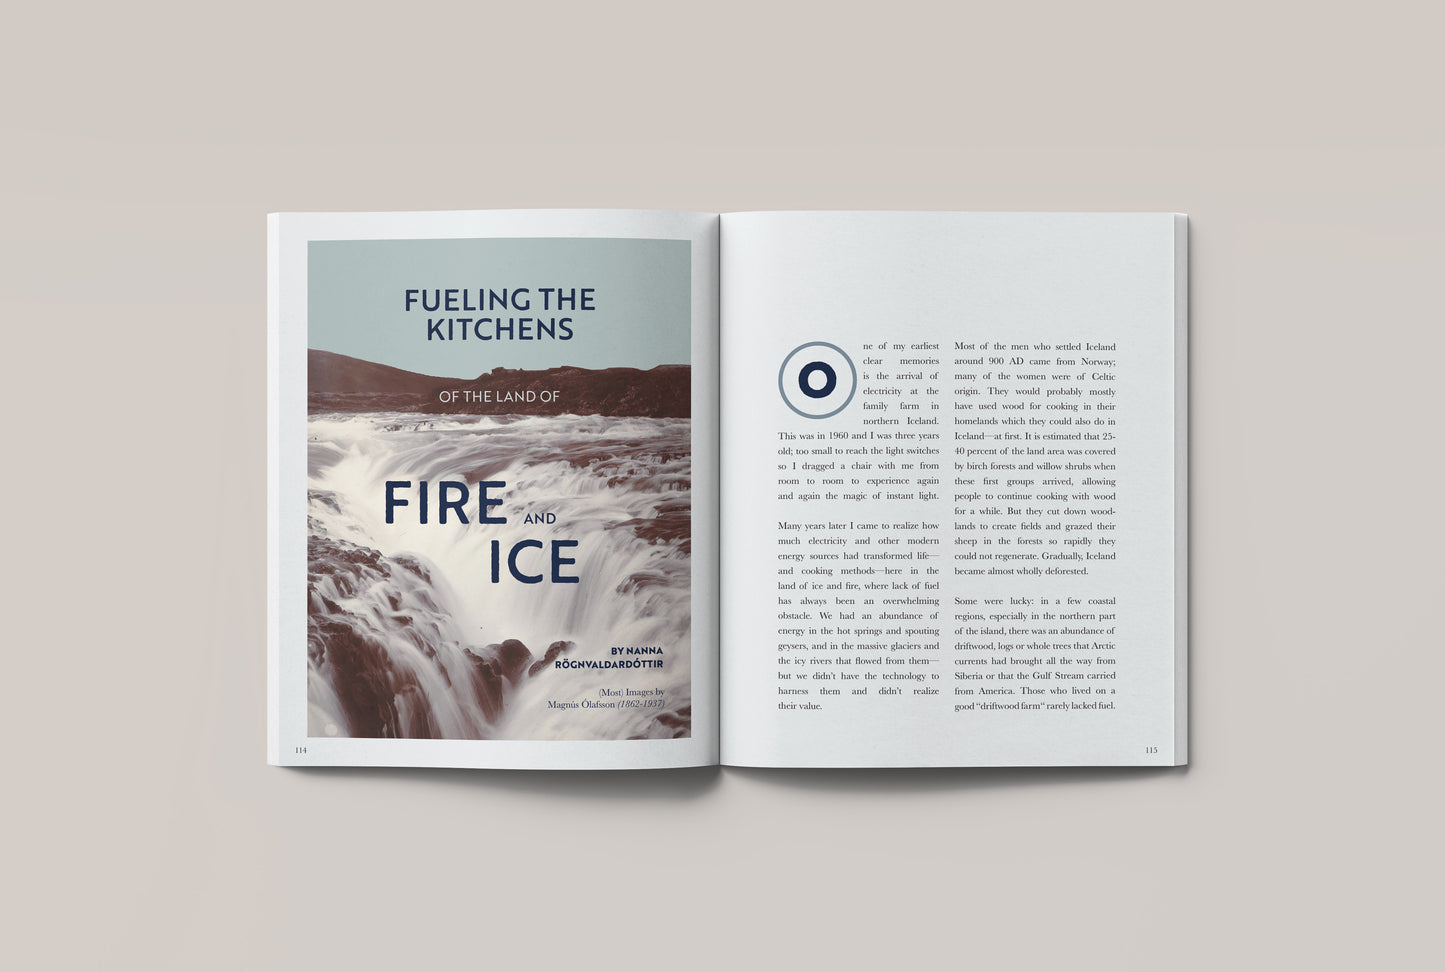 No. 9: Fire and Ice